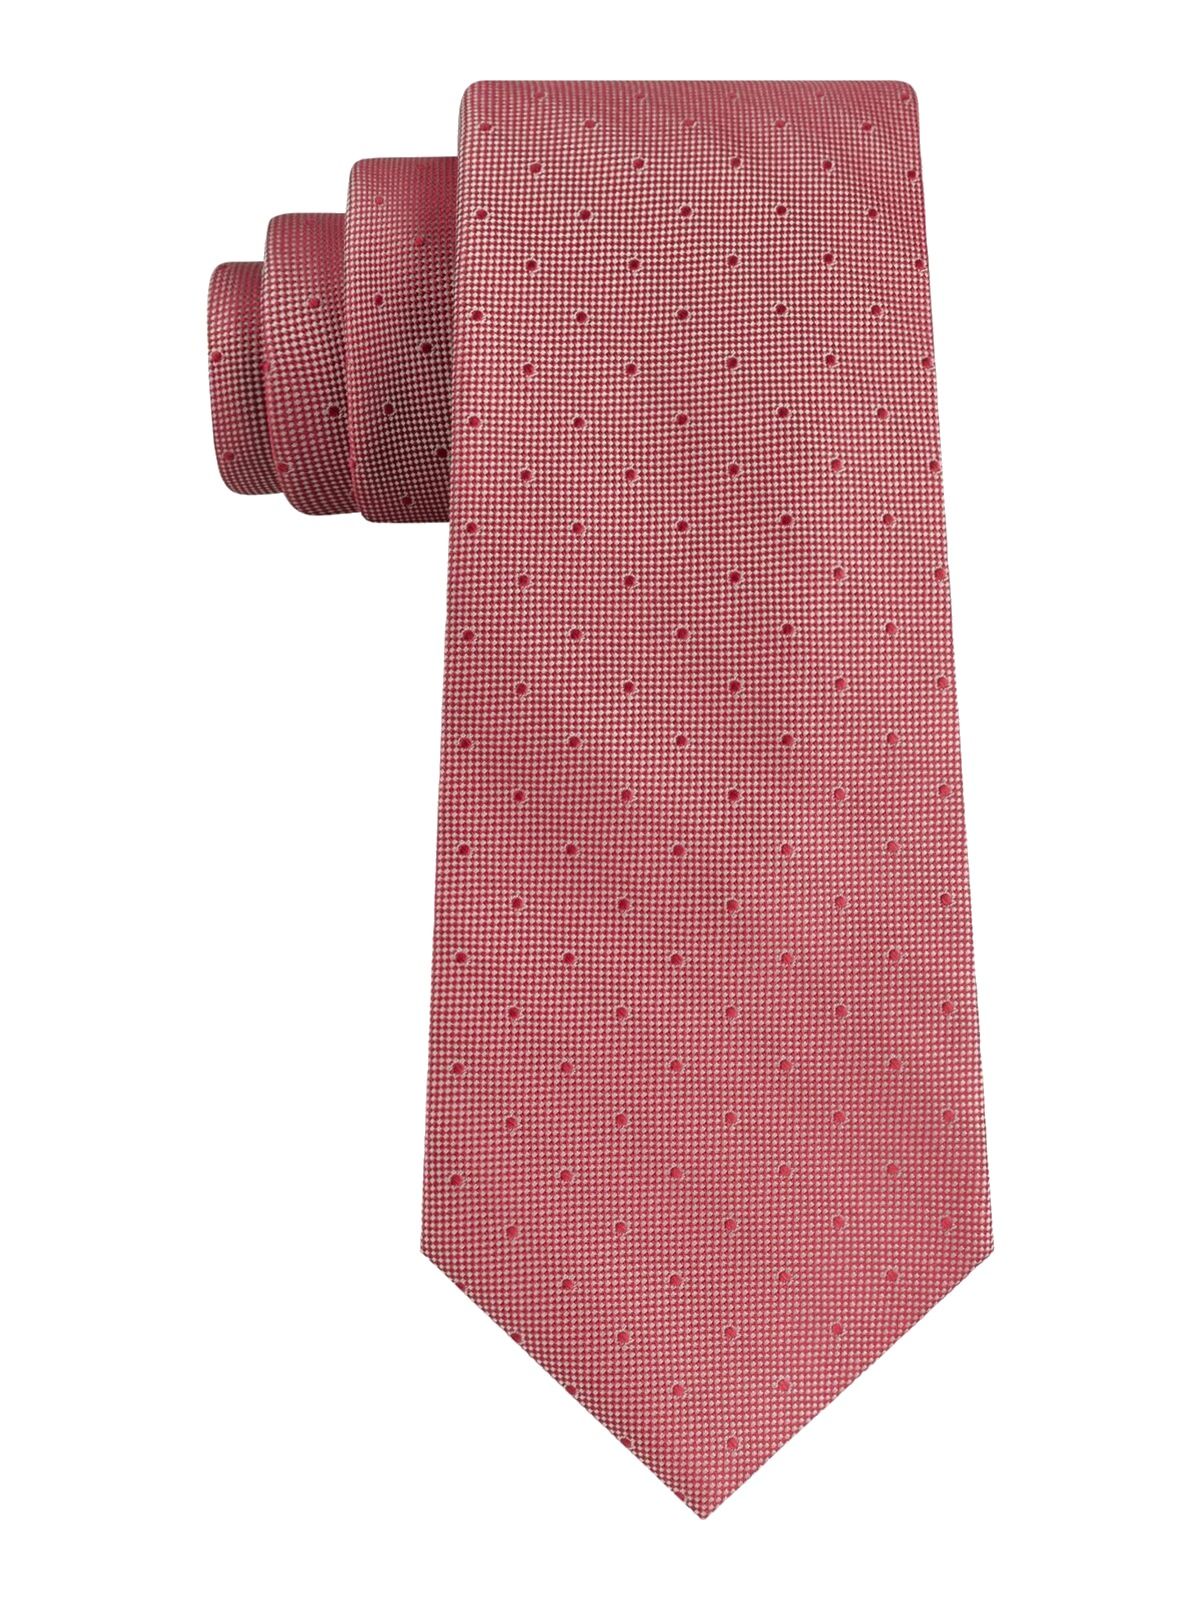 Color: Reds Size: One Size Pattern: Polka Dot Type: Tie Width: Skinny (Material: Polyester